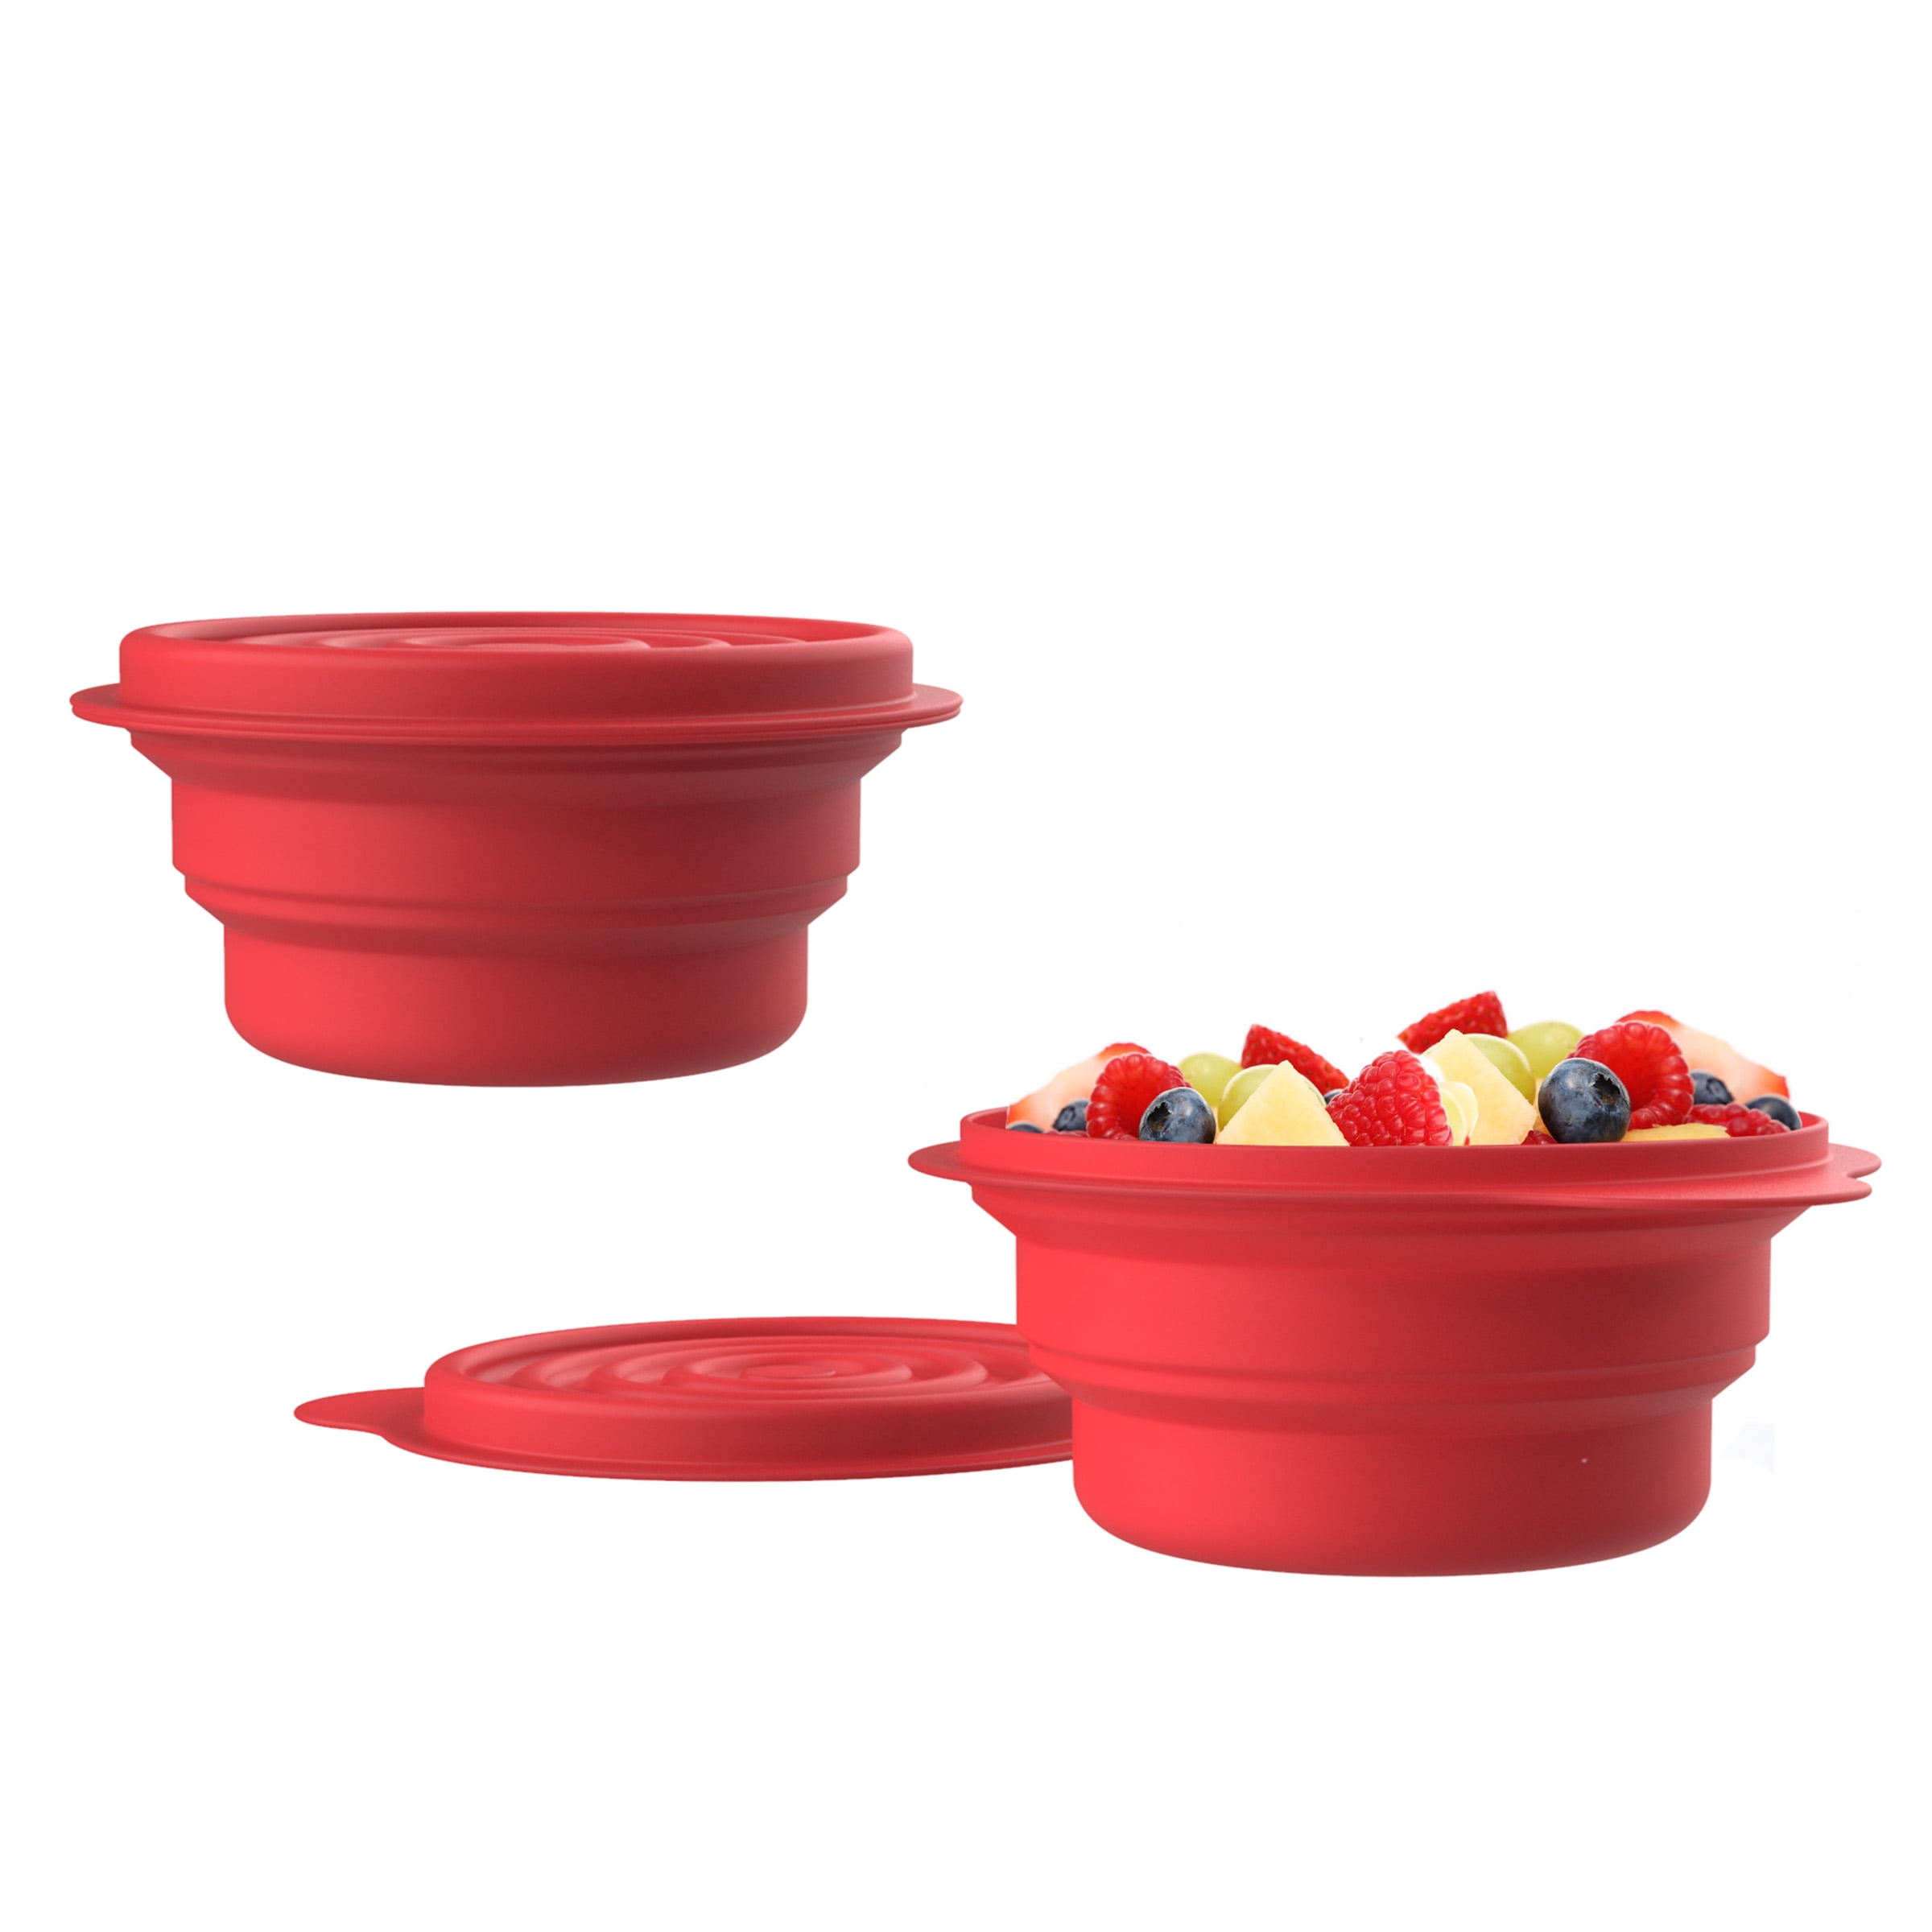 YAPROMO 1000 ML Collapsible Travel Bowl Silicone Pet Bowl with Lid Camping  Hiking Picnic Bowl Portable Lunch Salad Fruit Bowl Green 1000ML